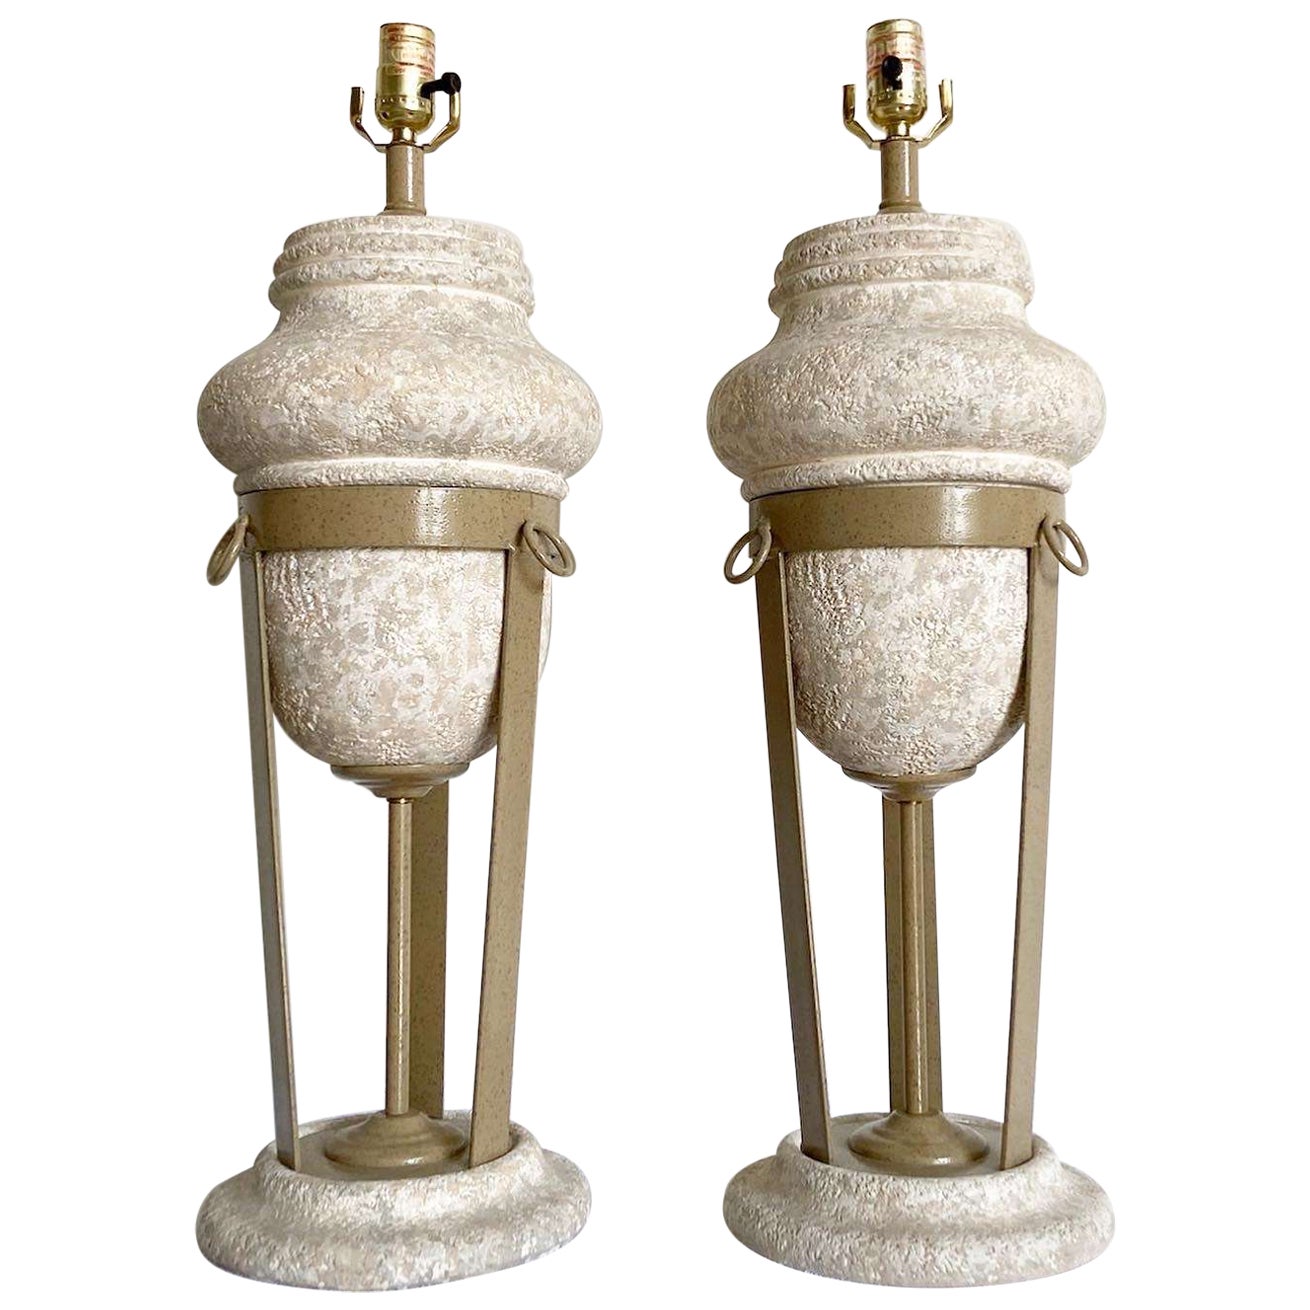 Postmodern Sculptural Plaster and Metal Table Lamps - a Pair For Sale